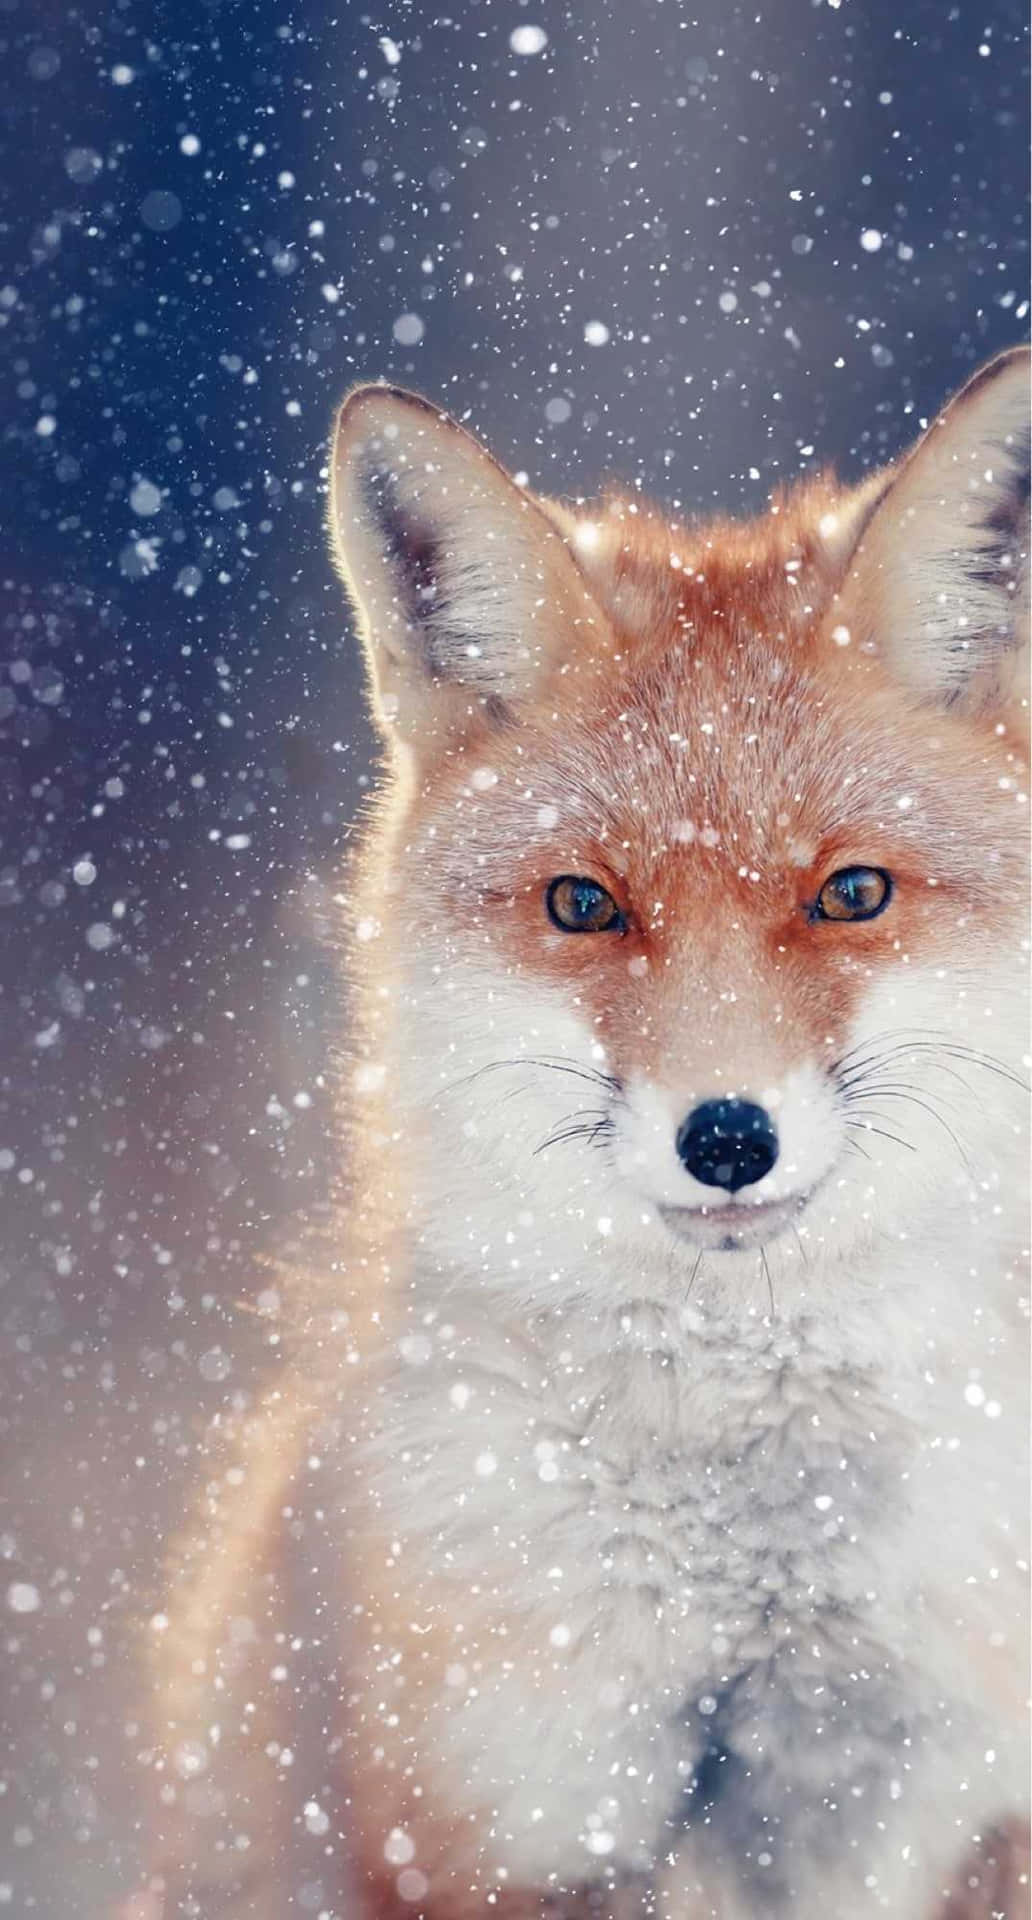 This Cool Anime Fox is Ready to Play Wallpaper